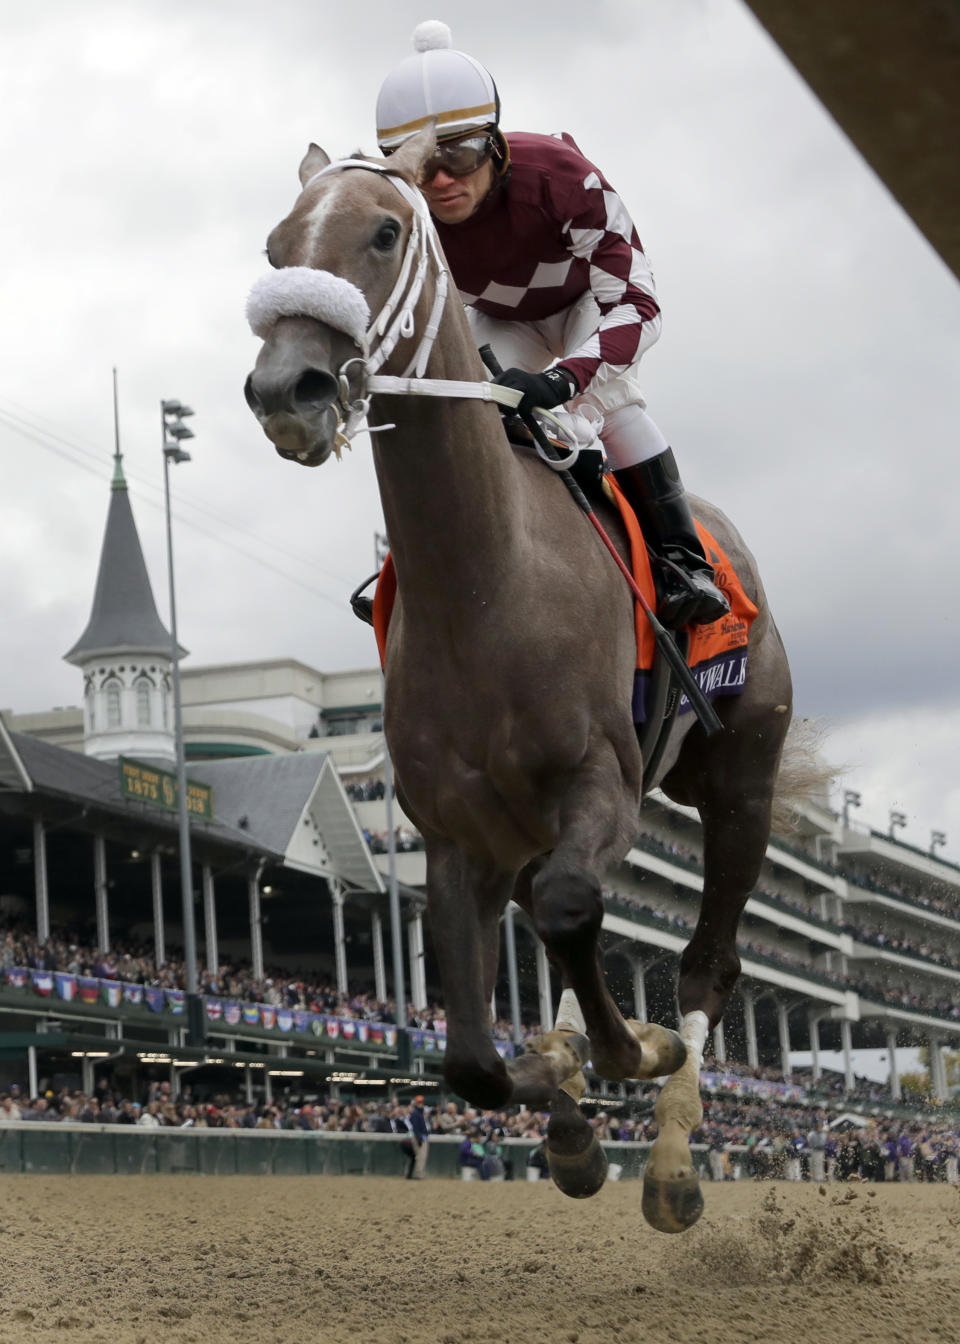 Joel Rosario rides Jaywalk to victory in the Breeders' Cup Juvenile Fillies horse race at Churchill Downs, Friday, Nov. 2, 2018, in Louisville, Ky. (AP Photo/Darron Cummings)